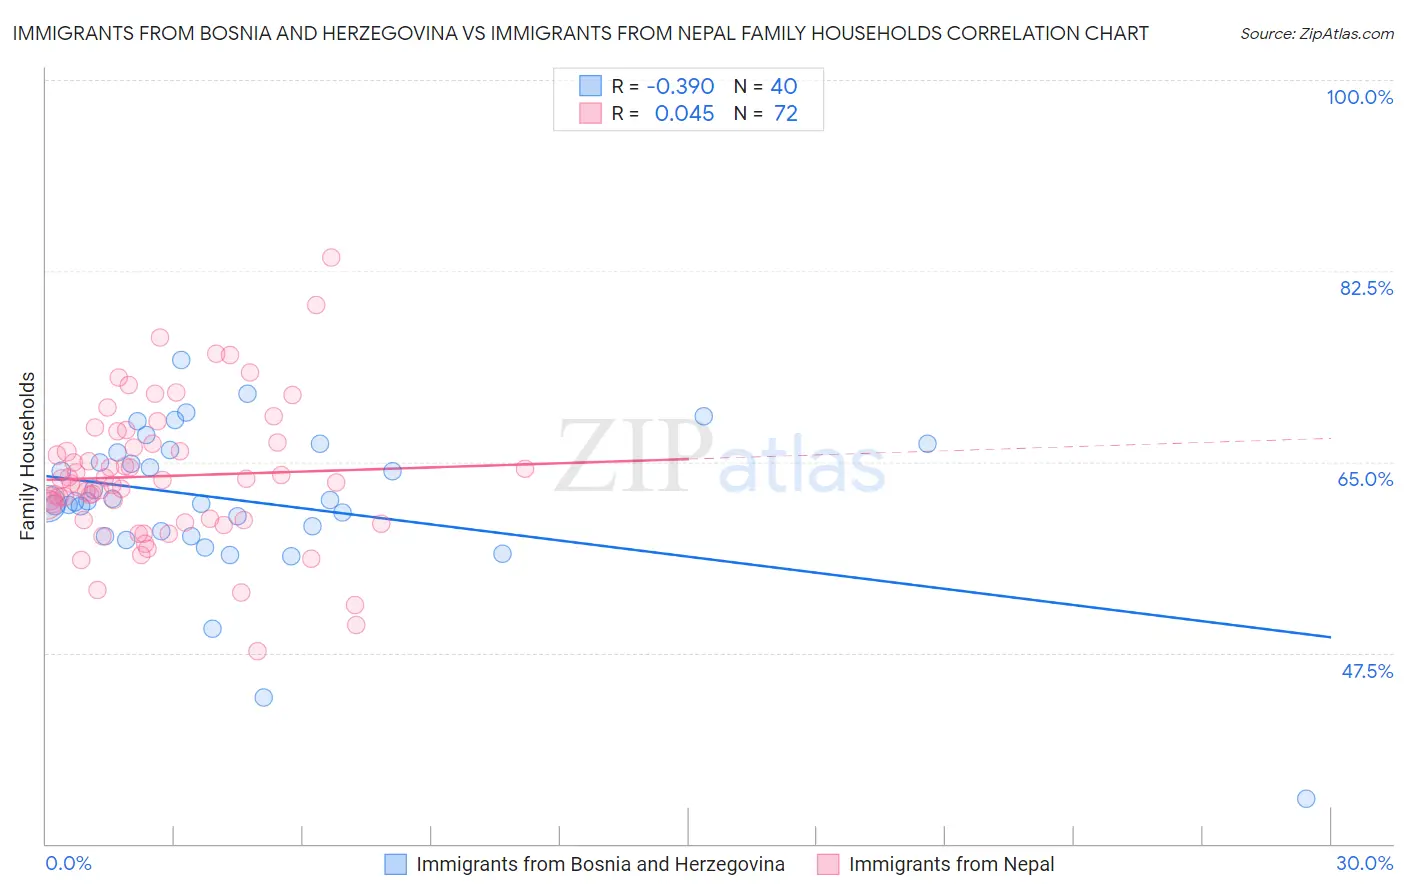 Immigrants from Bosnia and Herzegovina vs Immigrants from Nepal Family Households